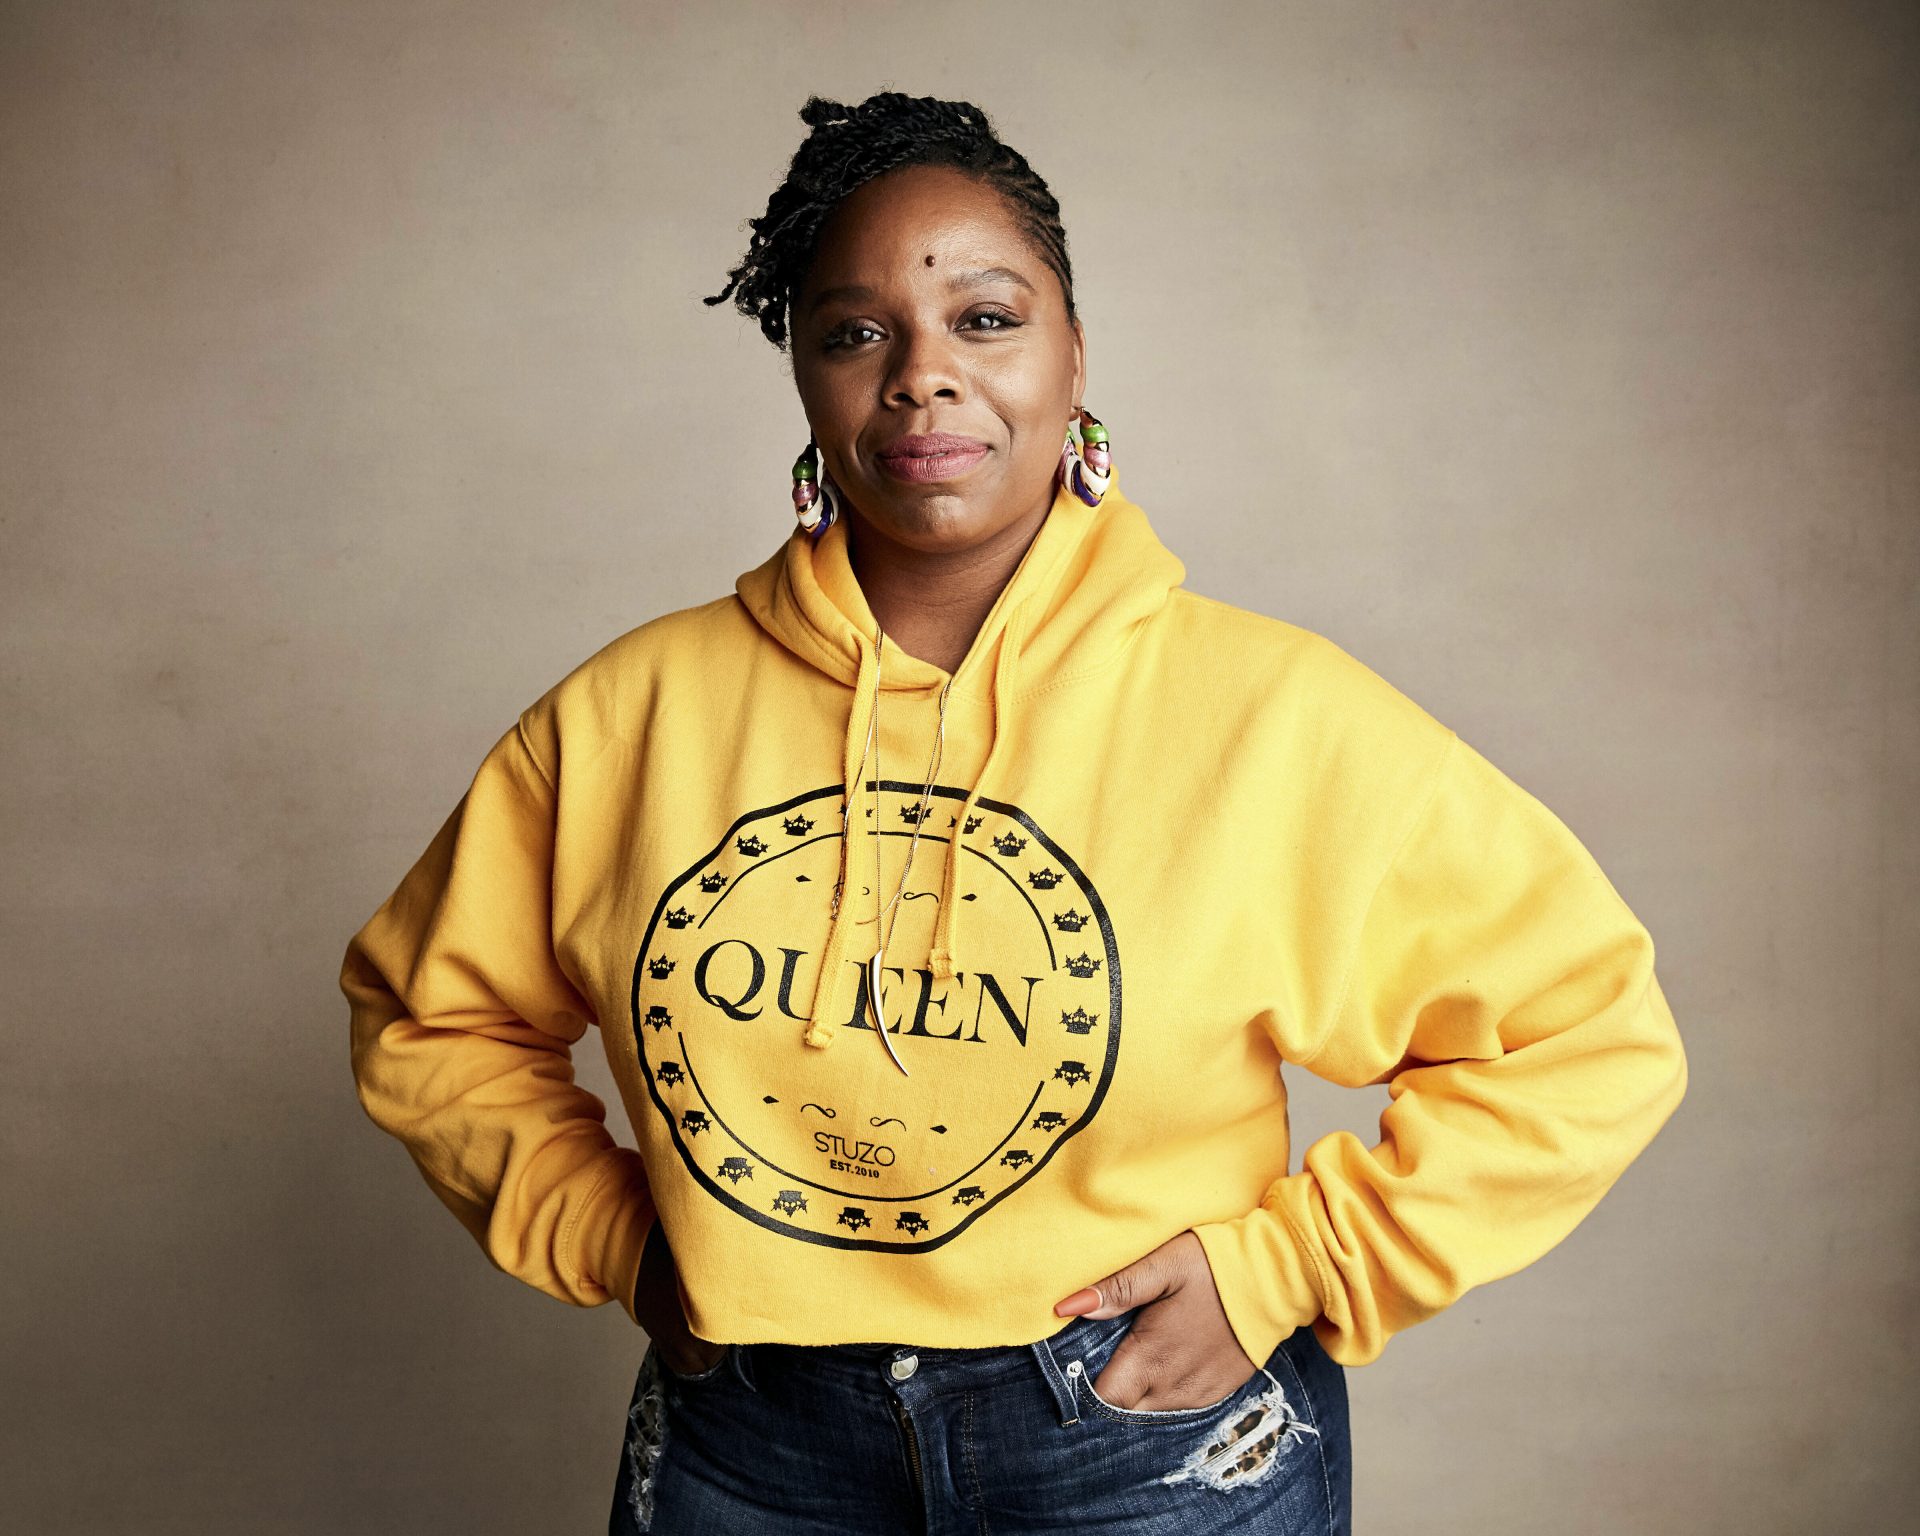 FILE PHOTO: In this Jan. 27, 2019, file photo, Patrisse Cullors poses for a portrait to promote a film during the Sundance Film Festival in Park City, Utah. A financial snapshot shared exclusively with The Associated Press shows the Black Lives Matter Global Network Foundation raked in just over $90 million last year. Cullors, BLM co-founder, told the AP that the foundation is focused on a “need to reinvest into Black communities.”